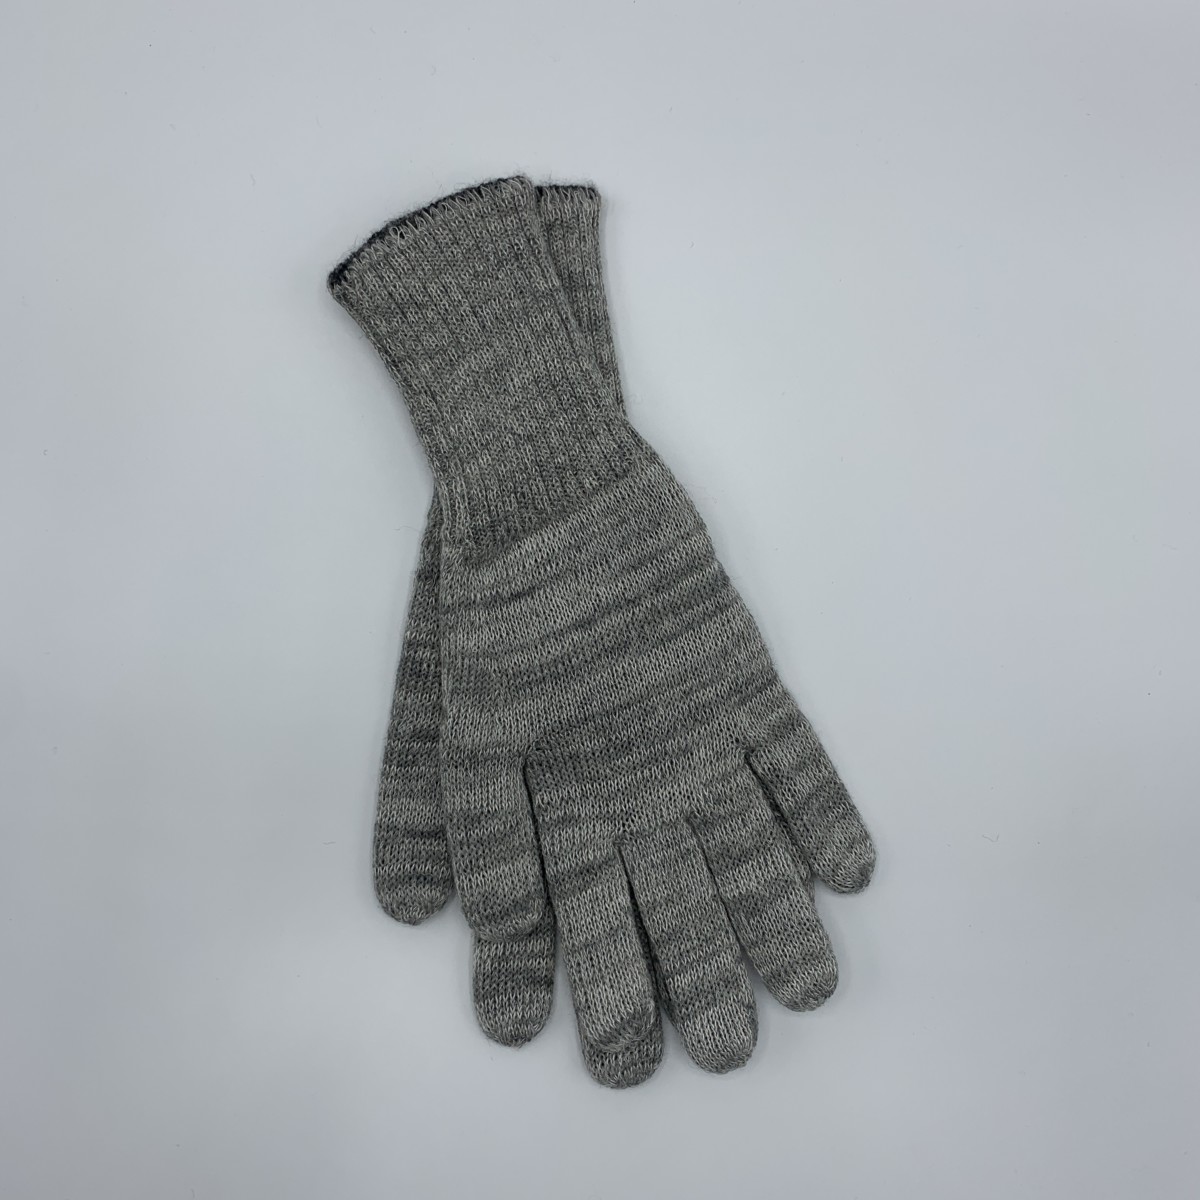 Small Reversible Baby Alpaca Gloves in Grey and White